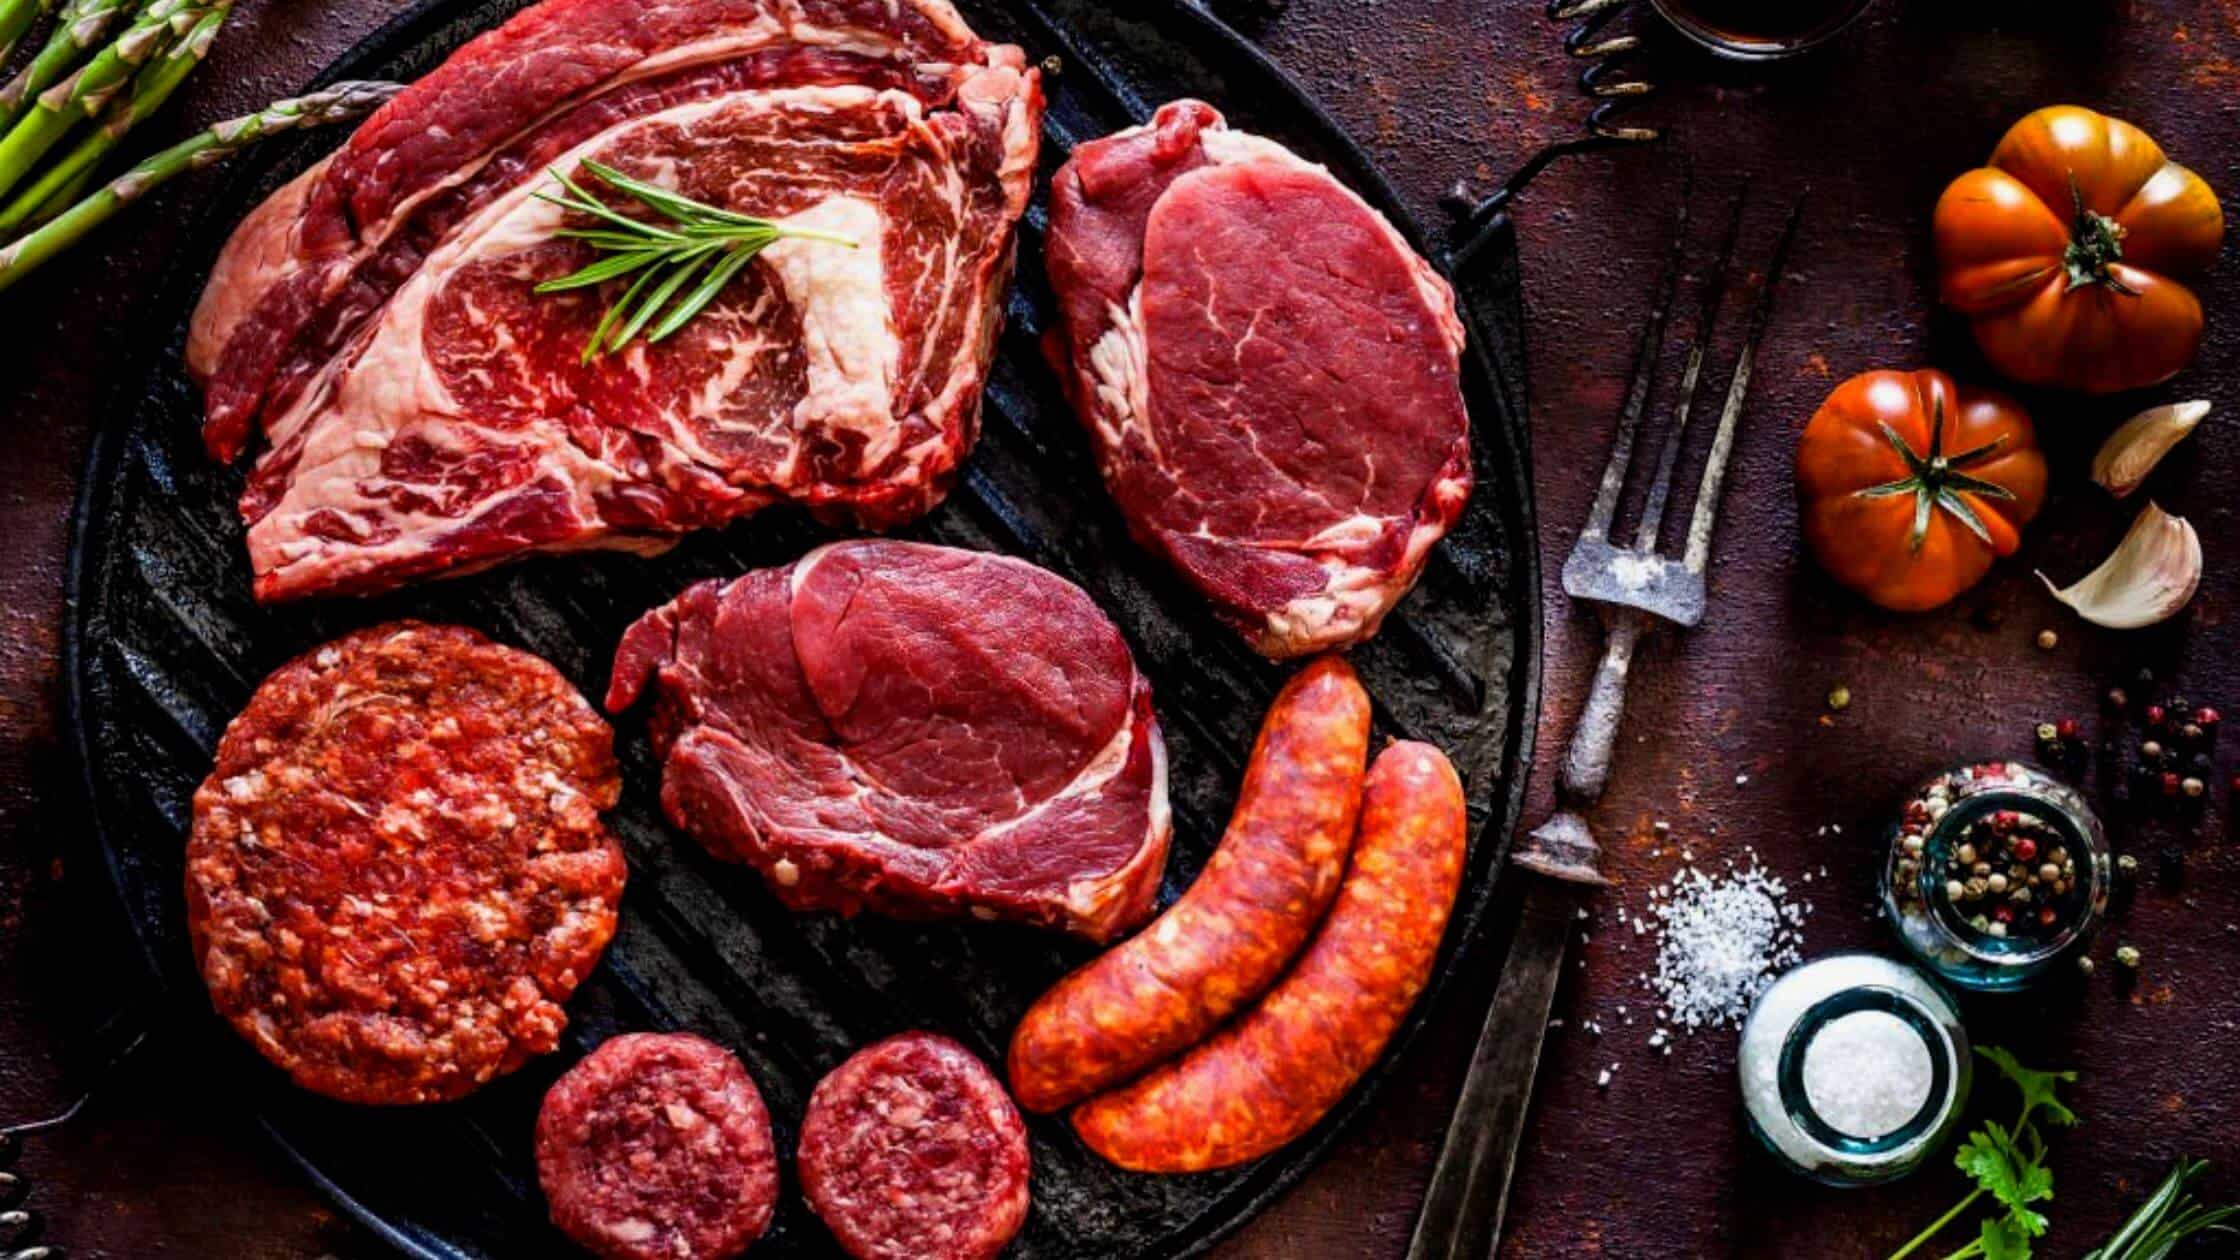 Consuming Red Meat May Increase Heart Disease Risk By 22%